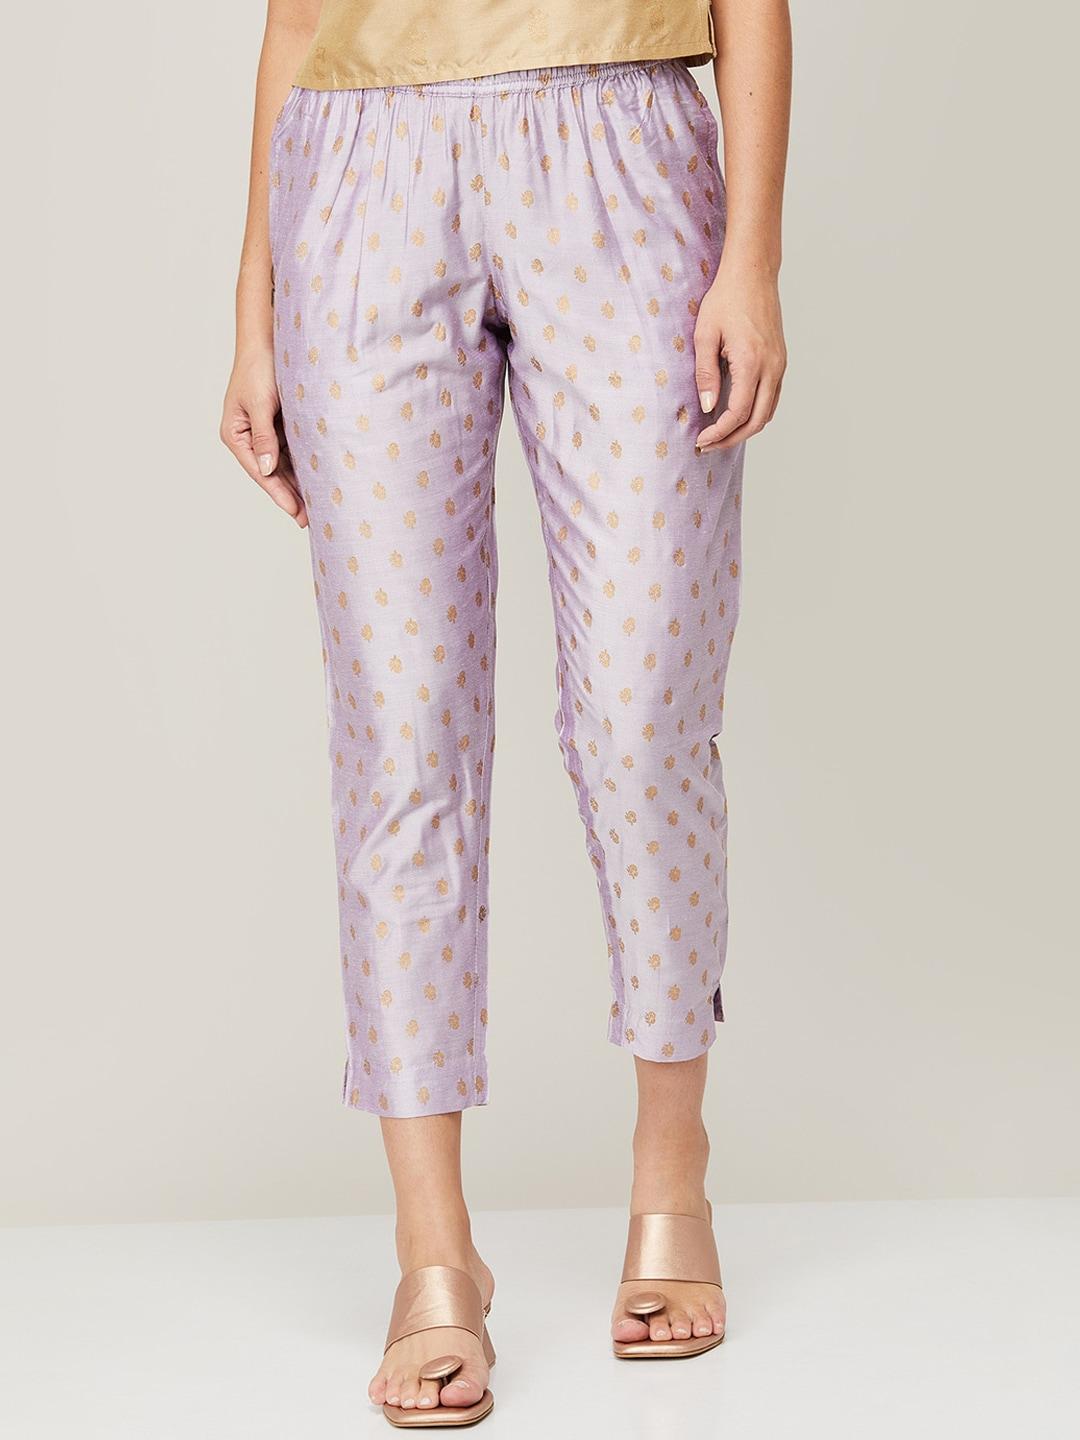 melange-by-lifestyle-women-purple-floral-print-high-rise-trousers